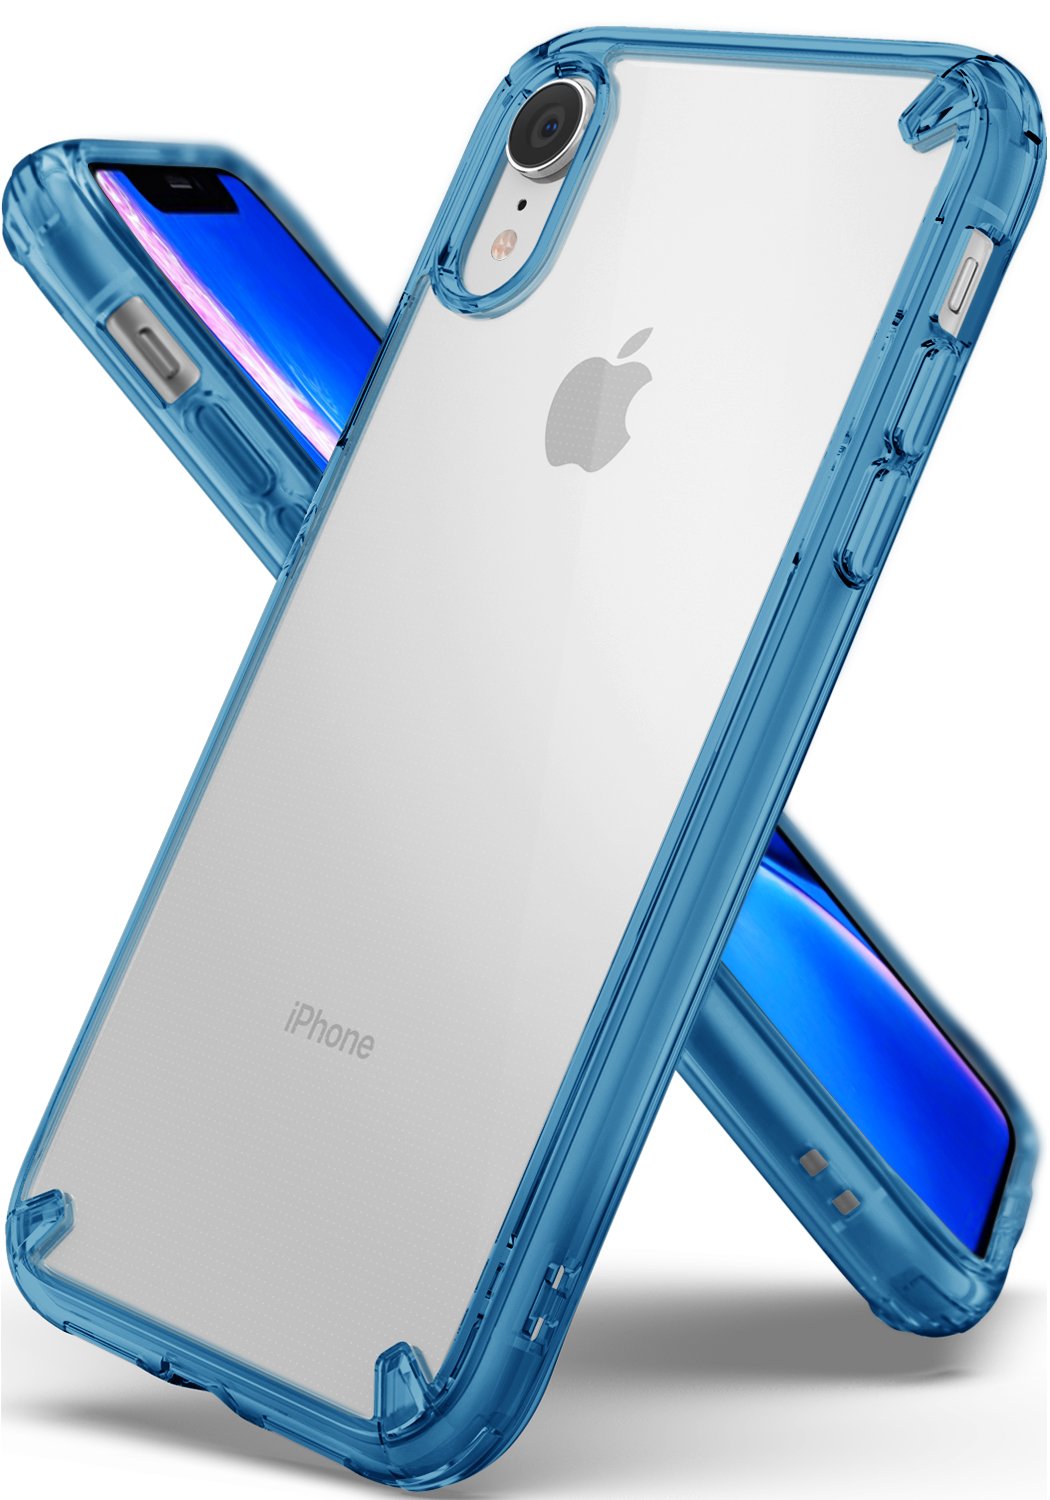 iPhone XR Case  Ringke Fusion – Ringke Official Store